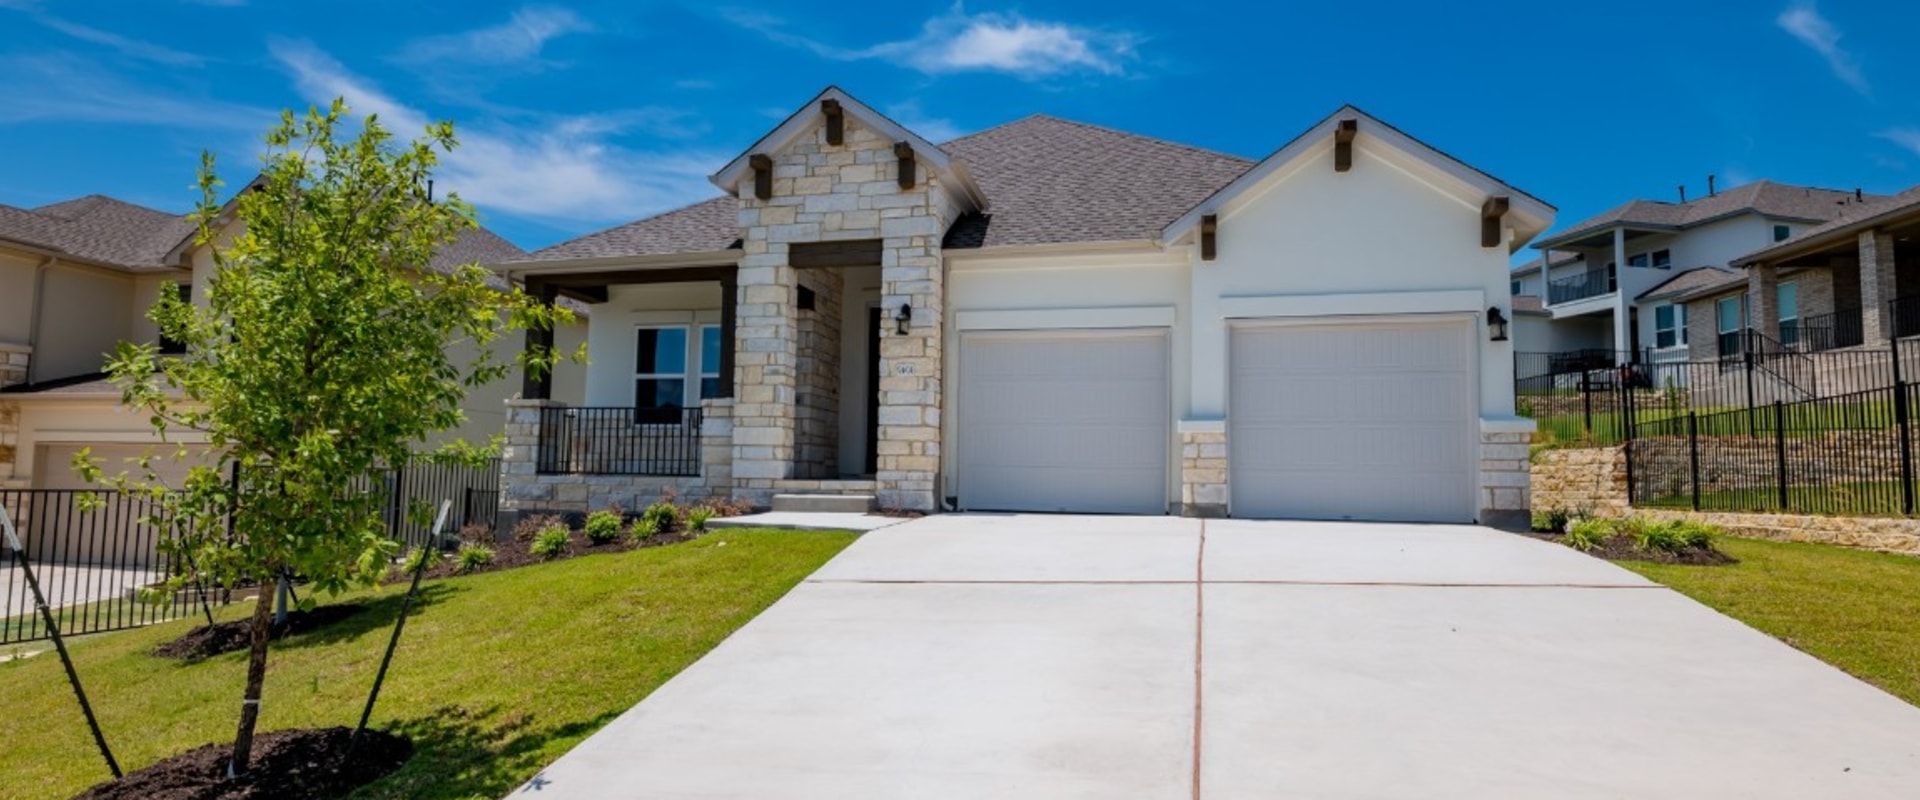 Invest in Central Texas Real Estate with South Street Villas